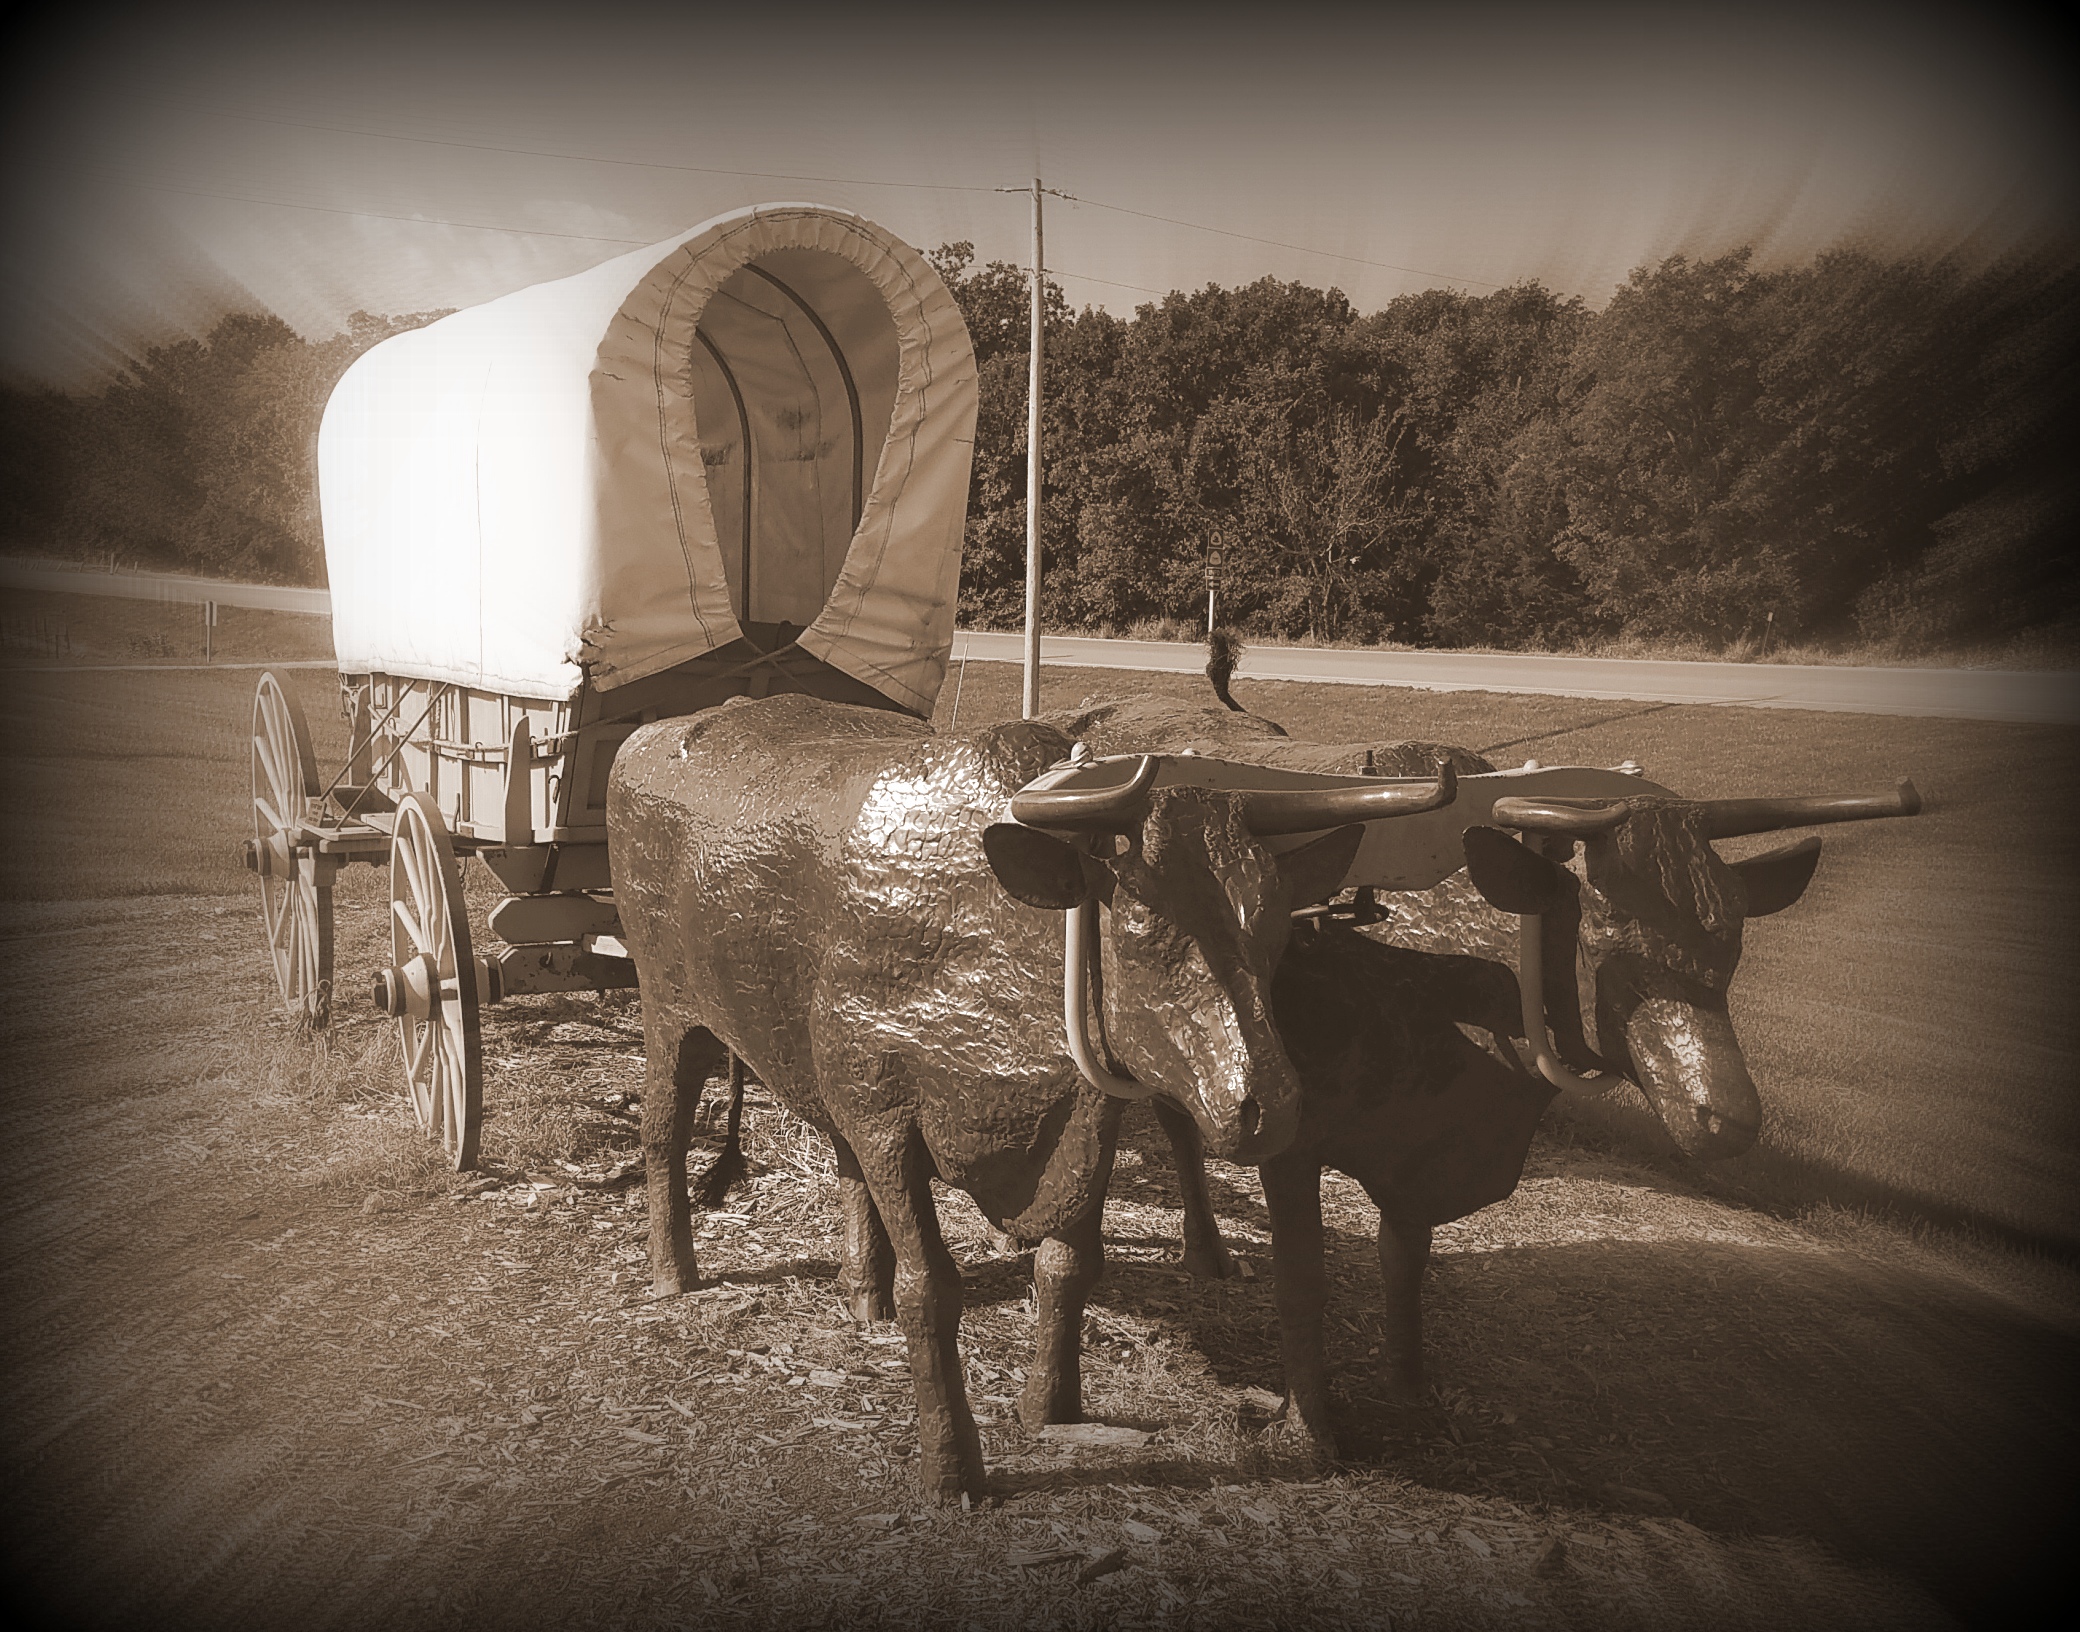 Oxen was often the means of transportation along the Oregon Trail.